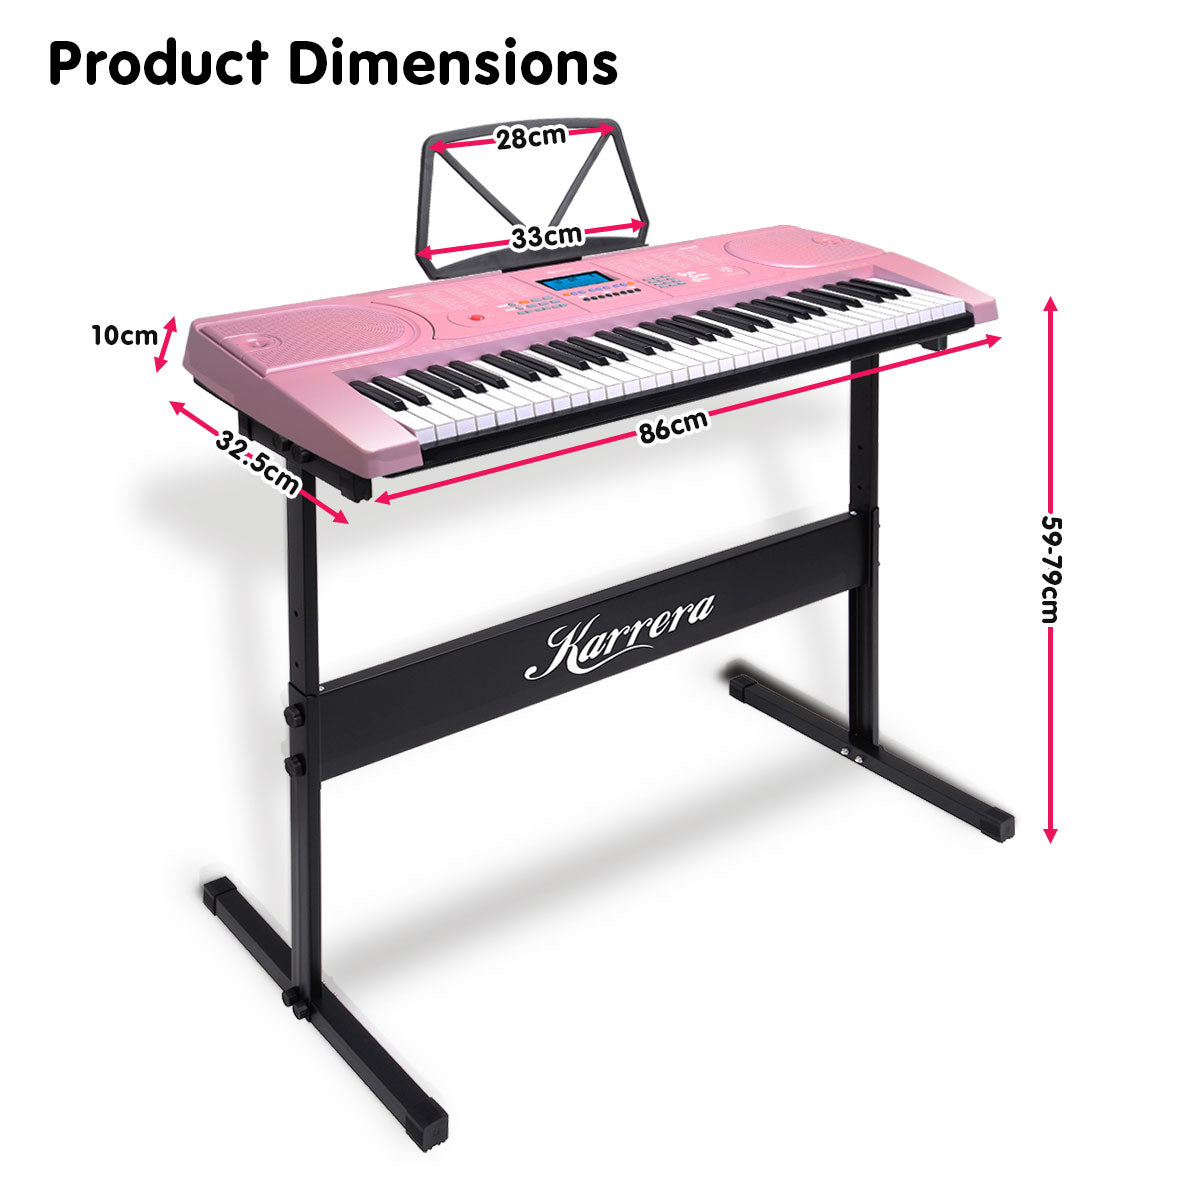 61 Keys Electronic Keyboard Piano Music with Stand - Pink